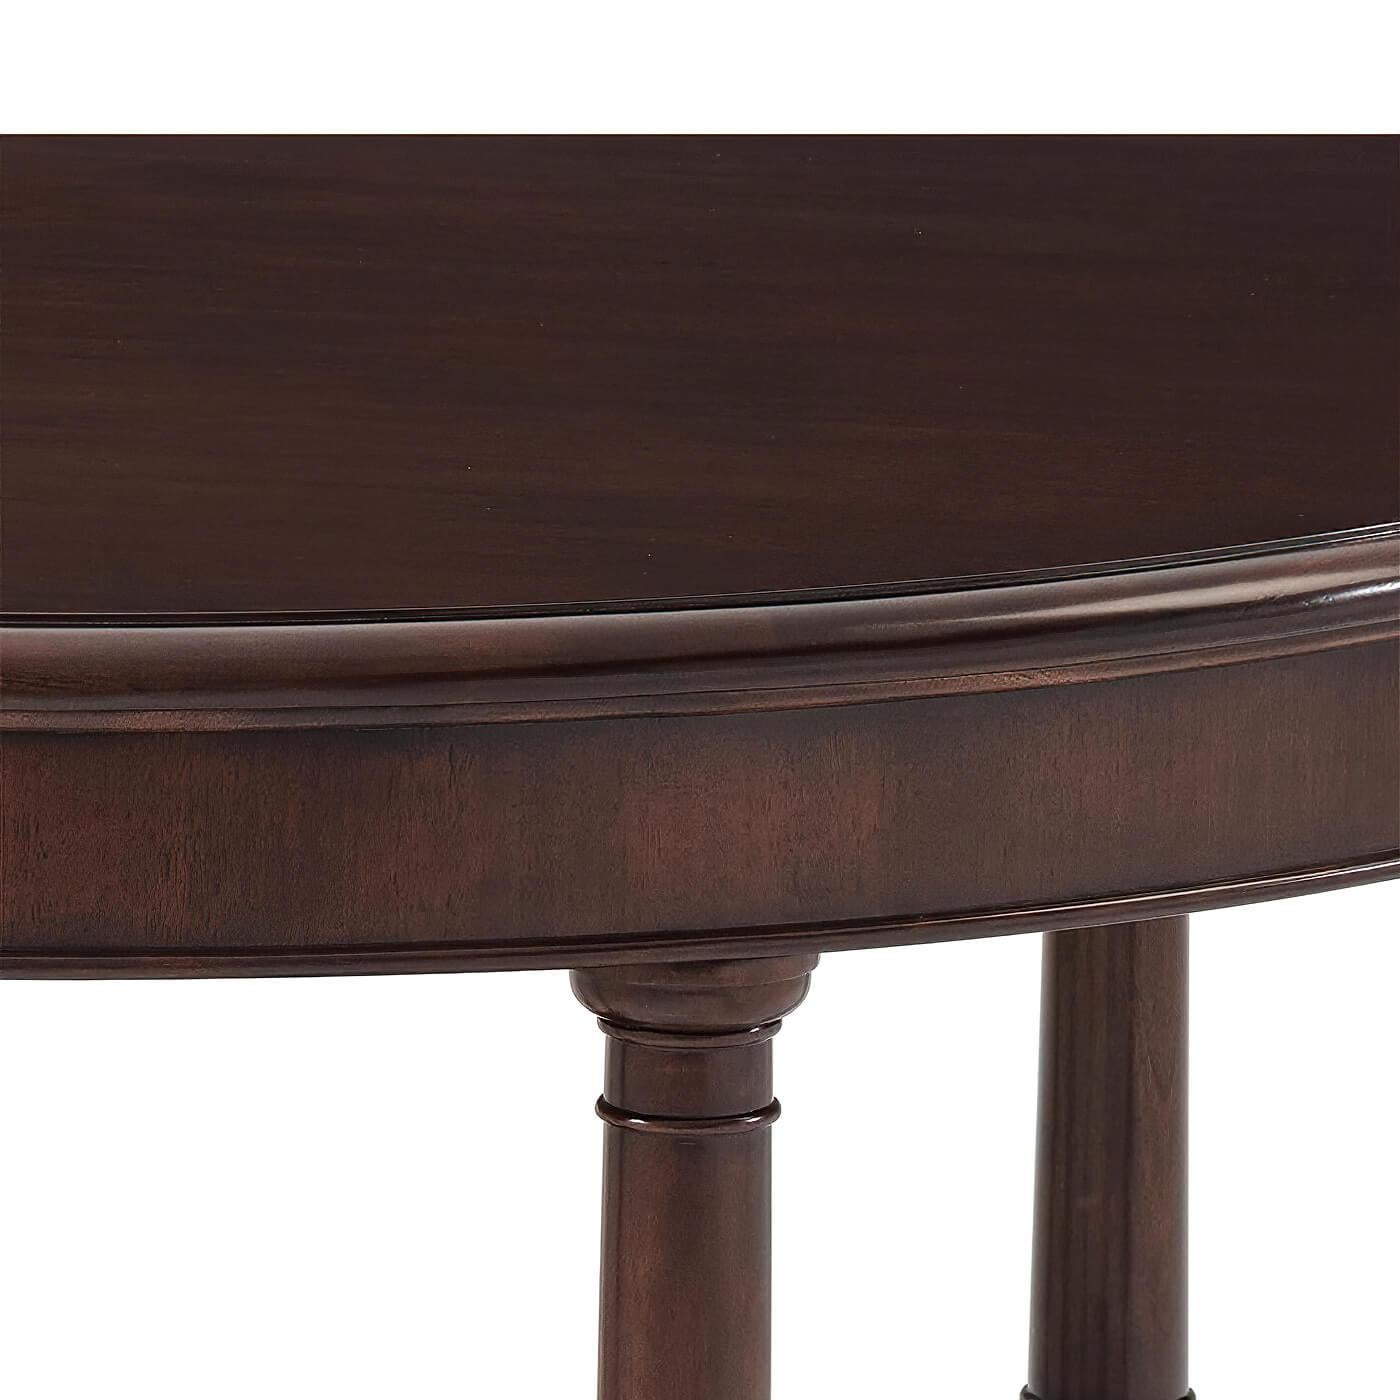 A French Empire style mahogany center table with six turned column-form legs with reeded baluster carvings all raised on a six-point star shaped plinth base set on molded edge feet. 
Dimensions: 52